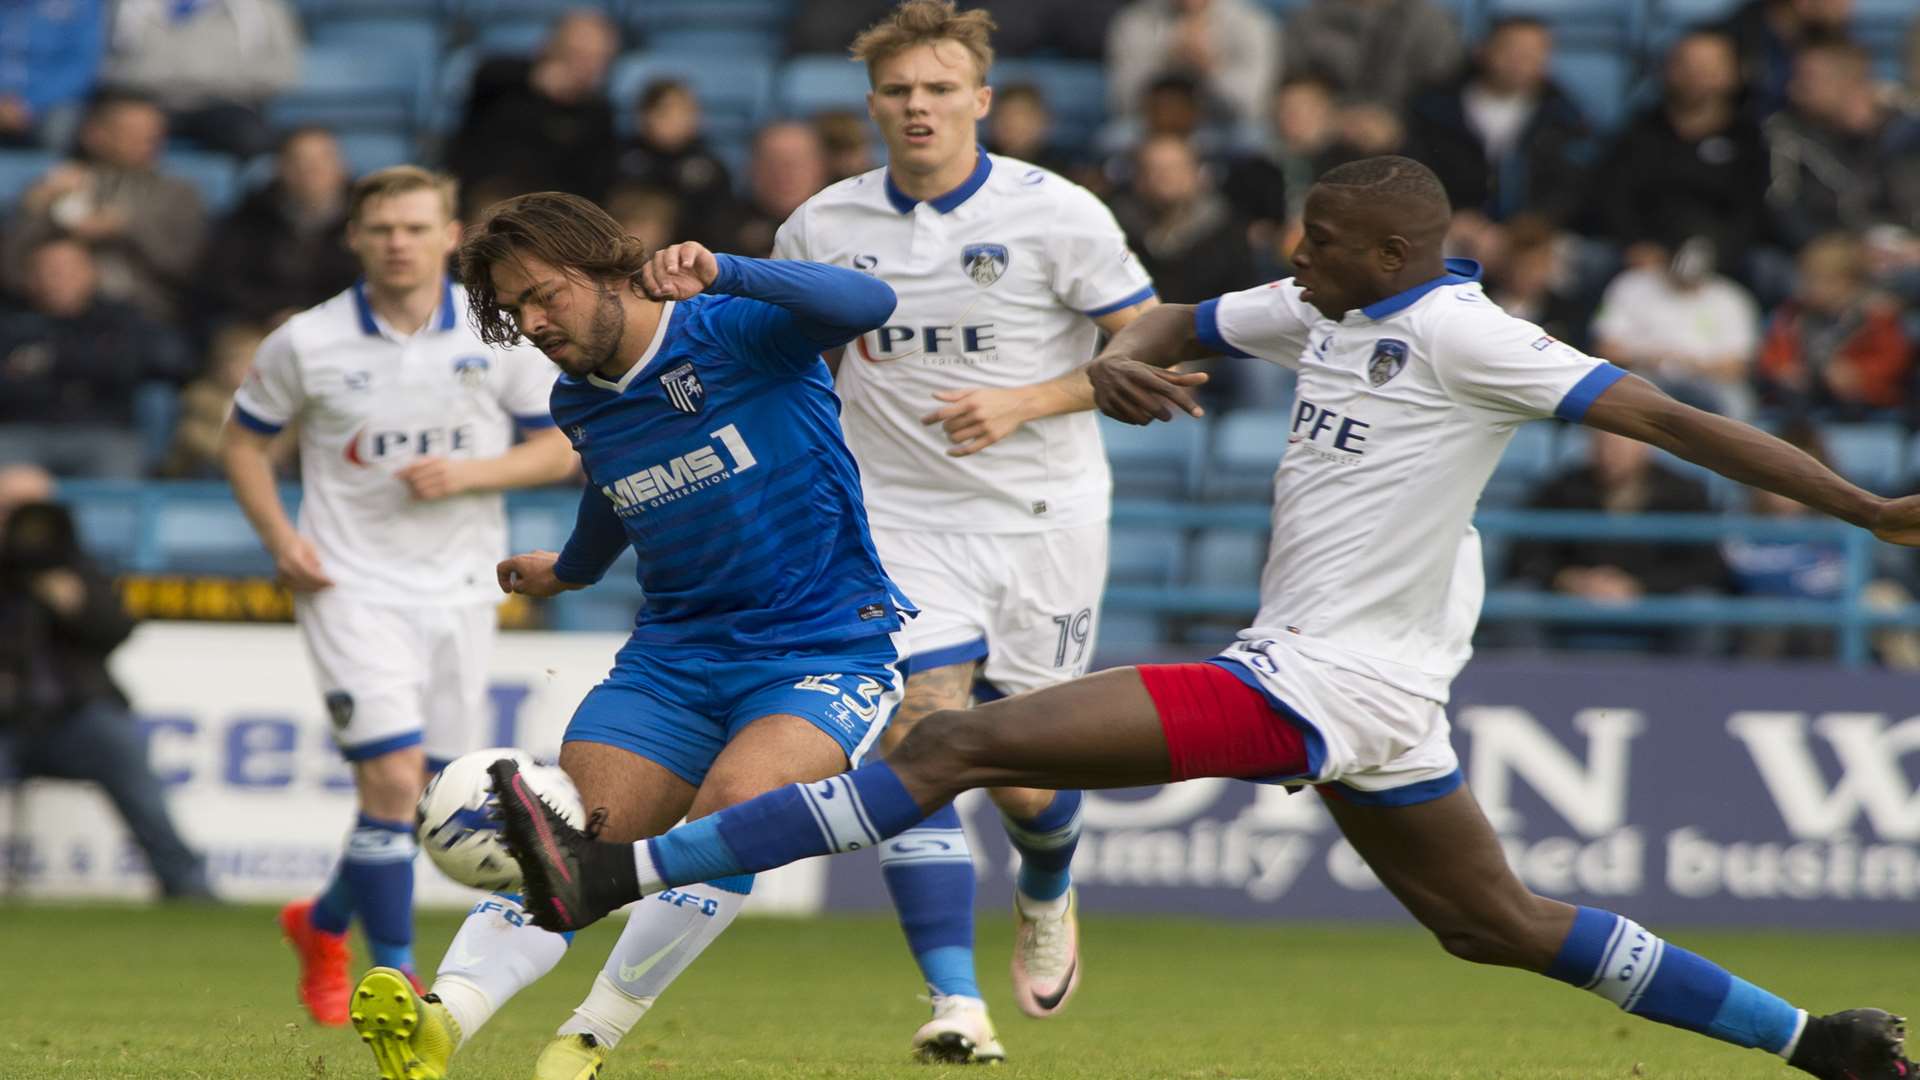 Oldham get a foot in to stop Bradley Dack Picture: Andy Payton